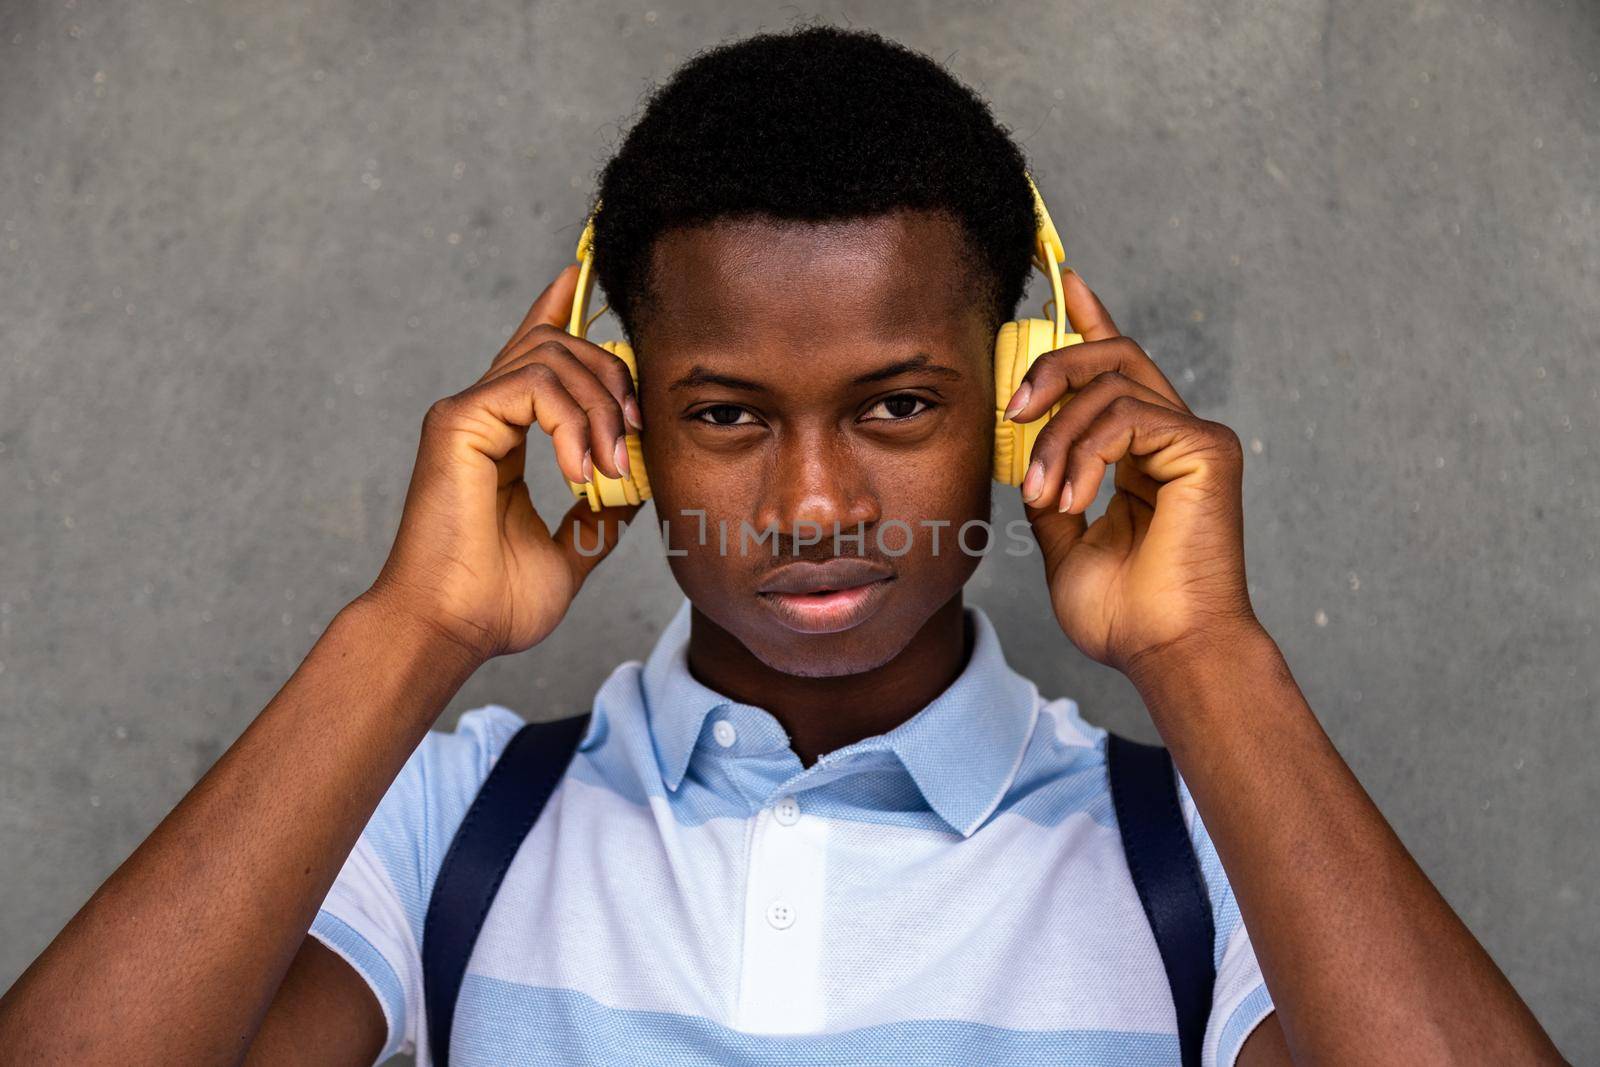 Teenage African American boy looking at camera holding headphones with hands. Lifestyle concept.